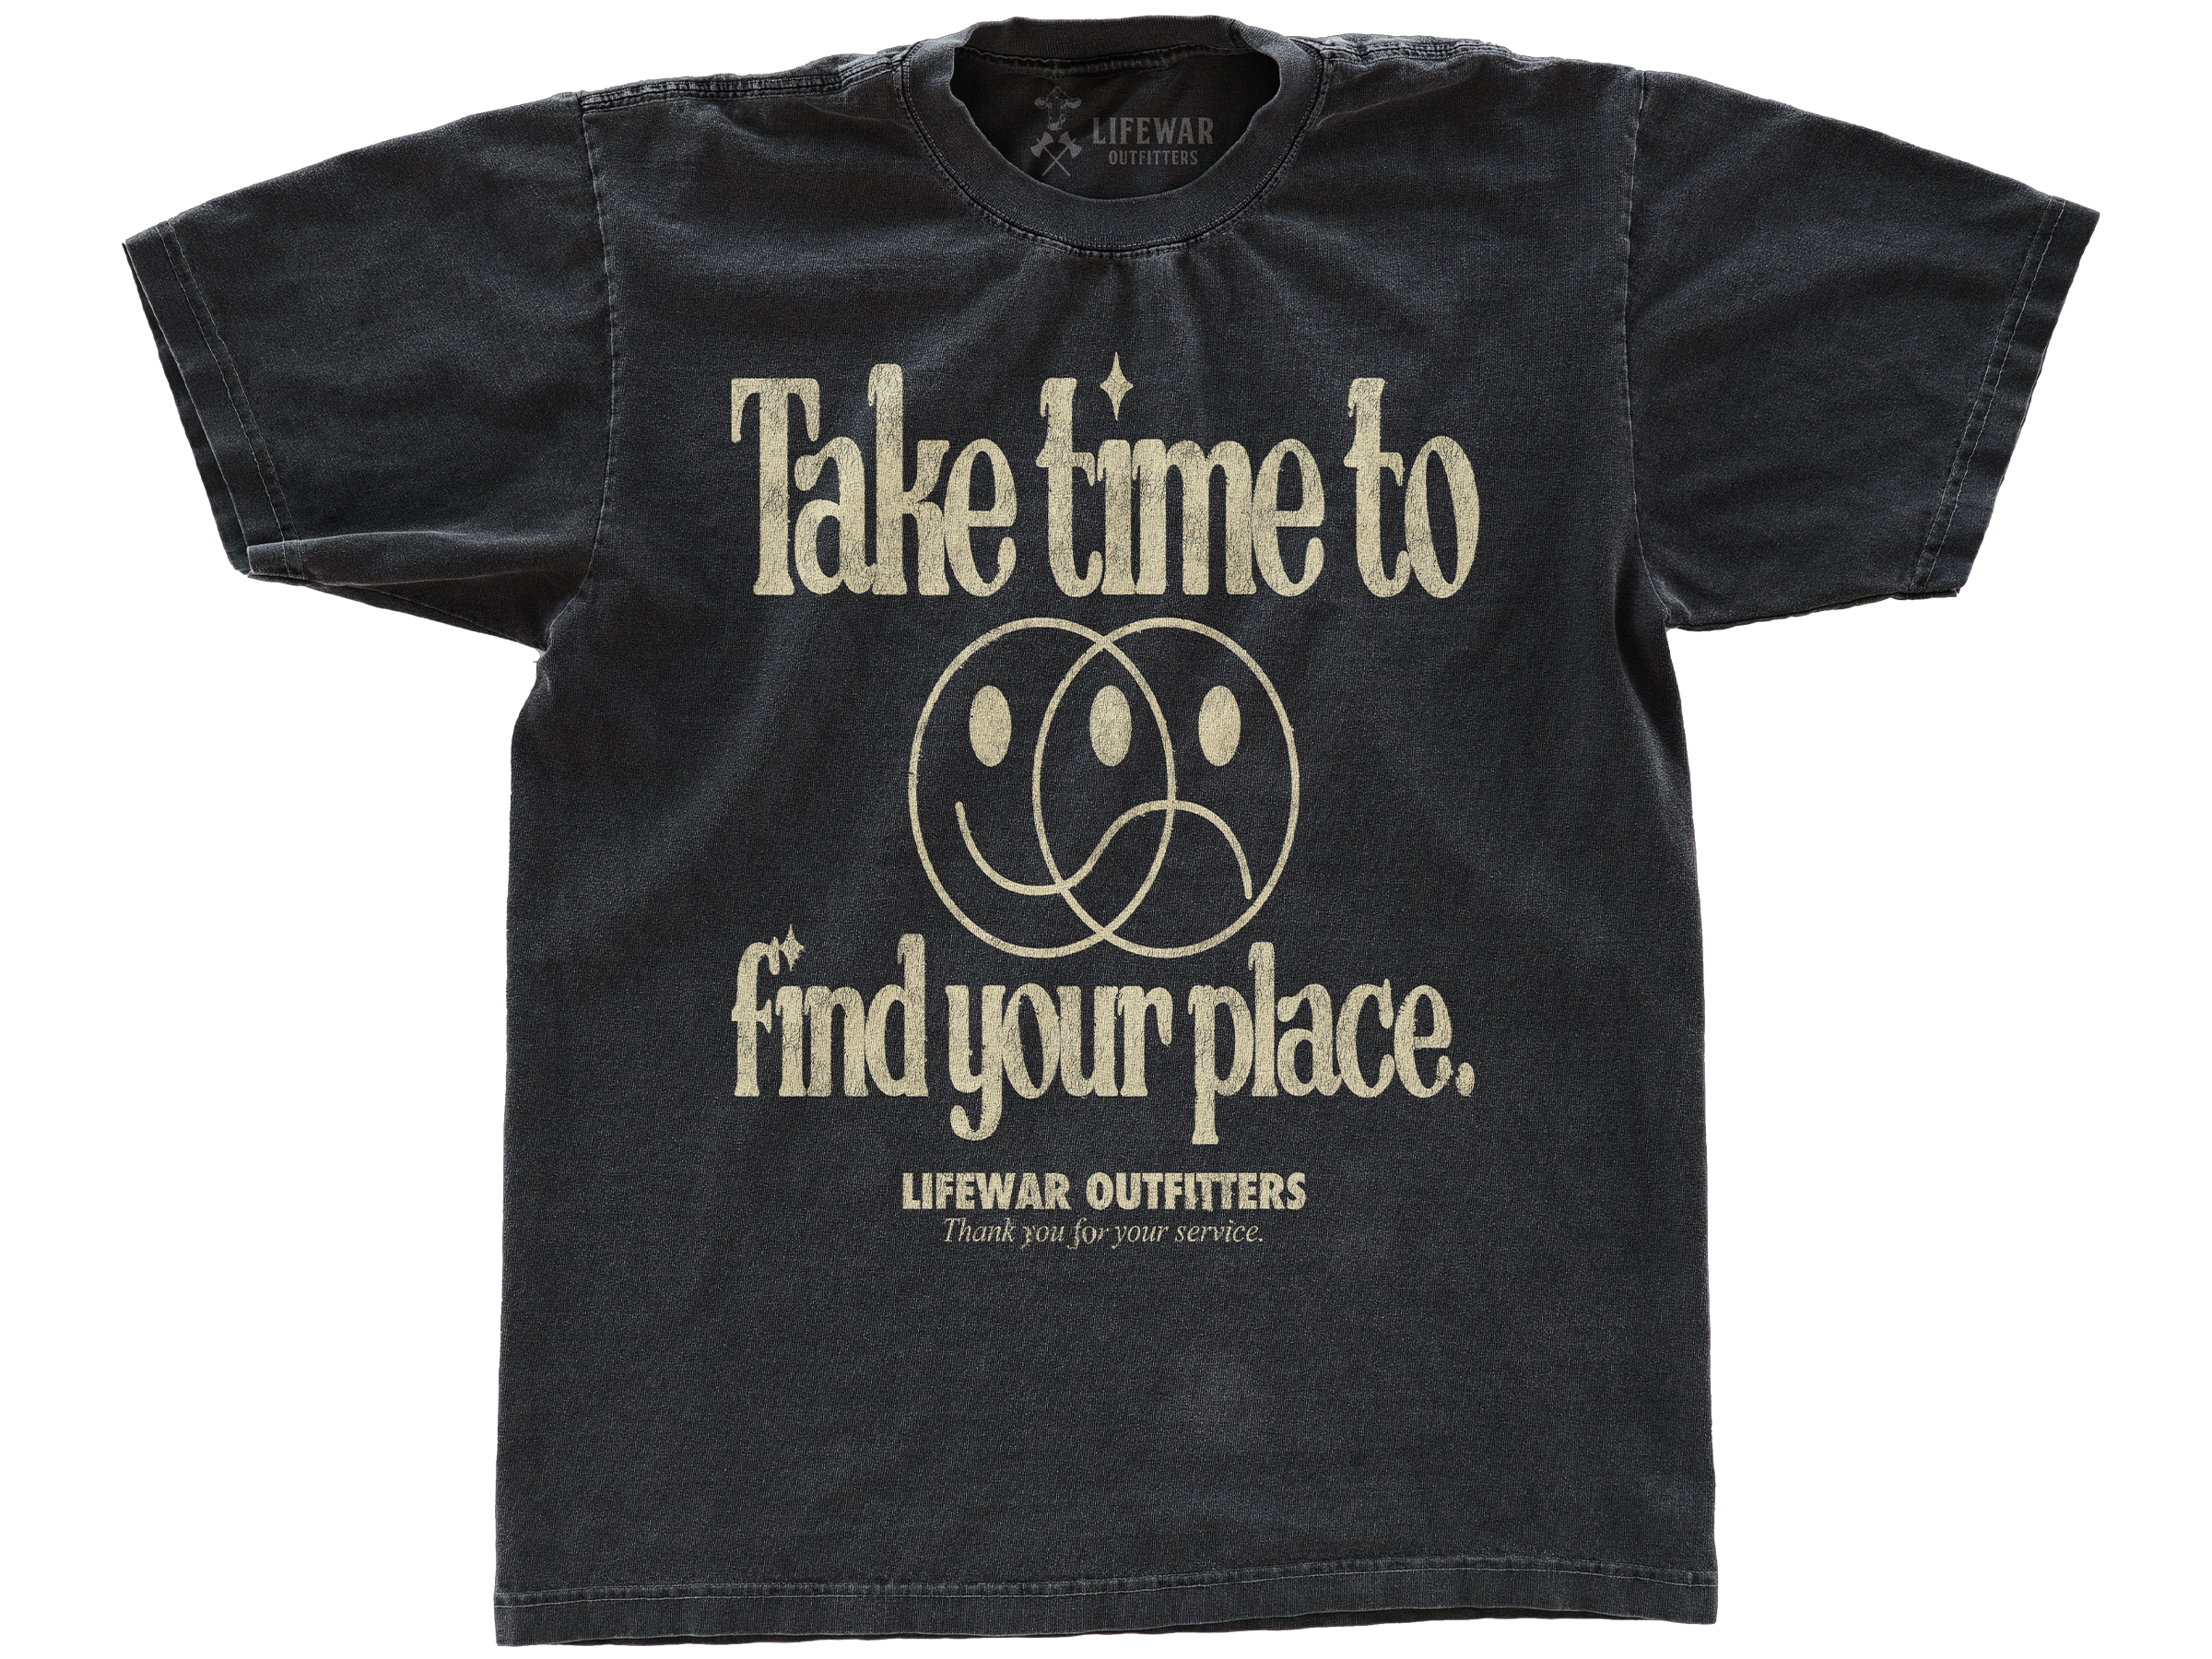 FIND YOUR PLACE (T-SHIRT)